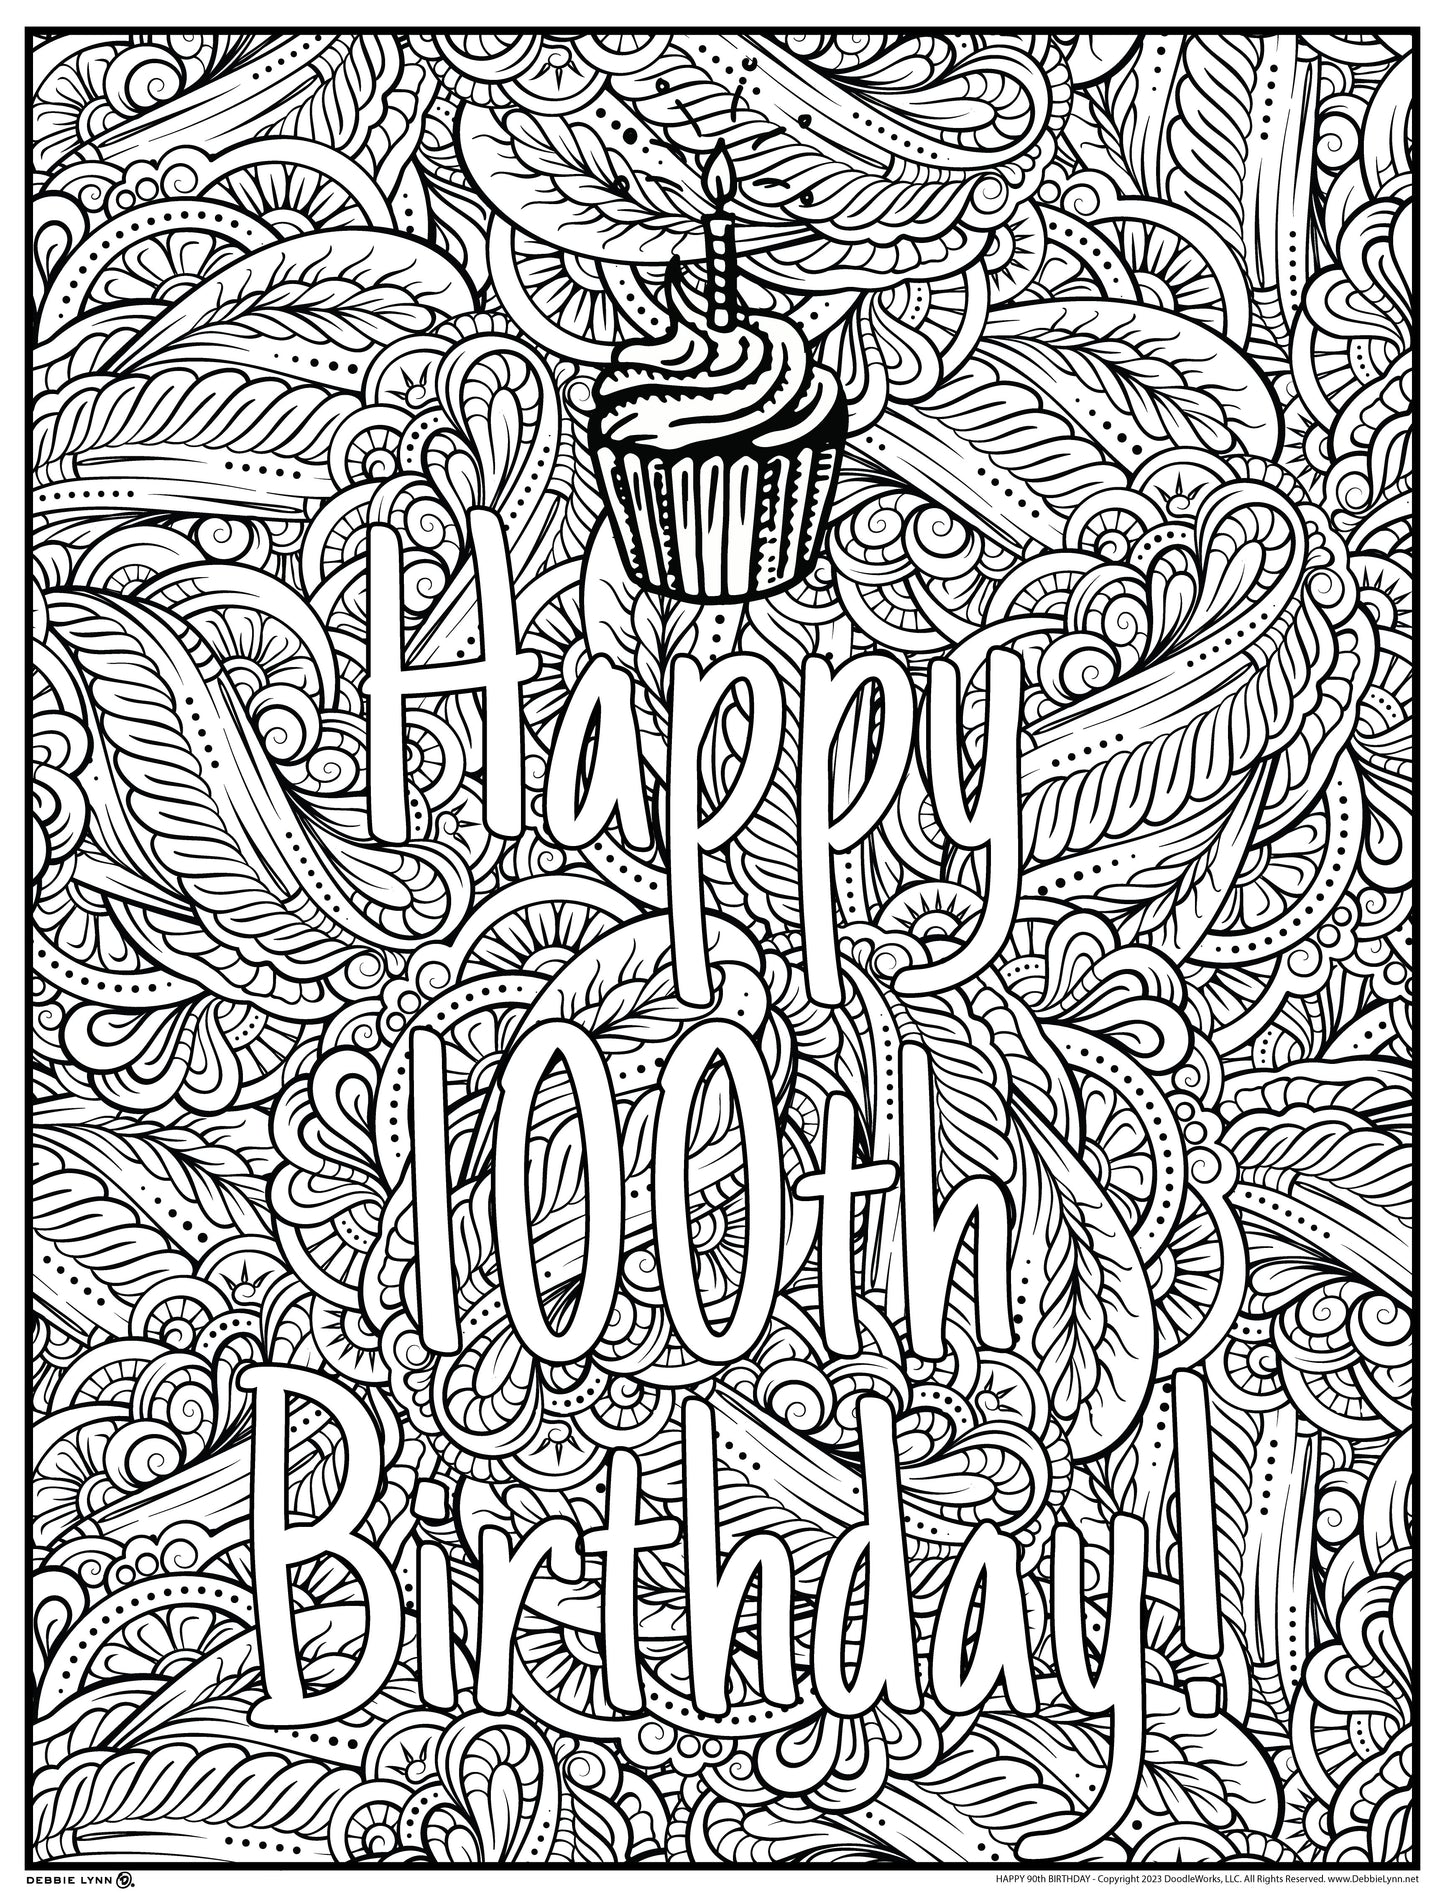 Happy 100 Personalized Giant Coloring Poster 46"x60"